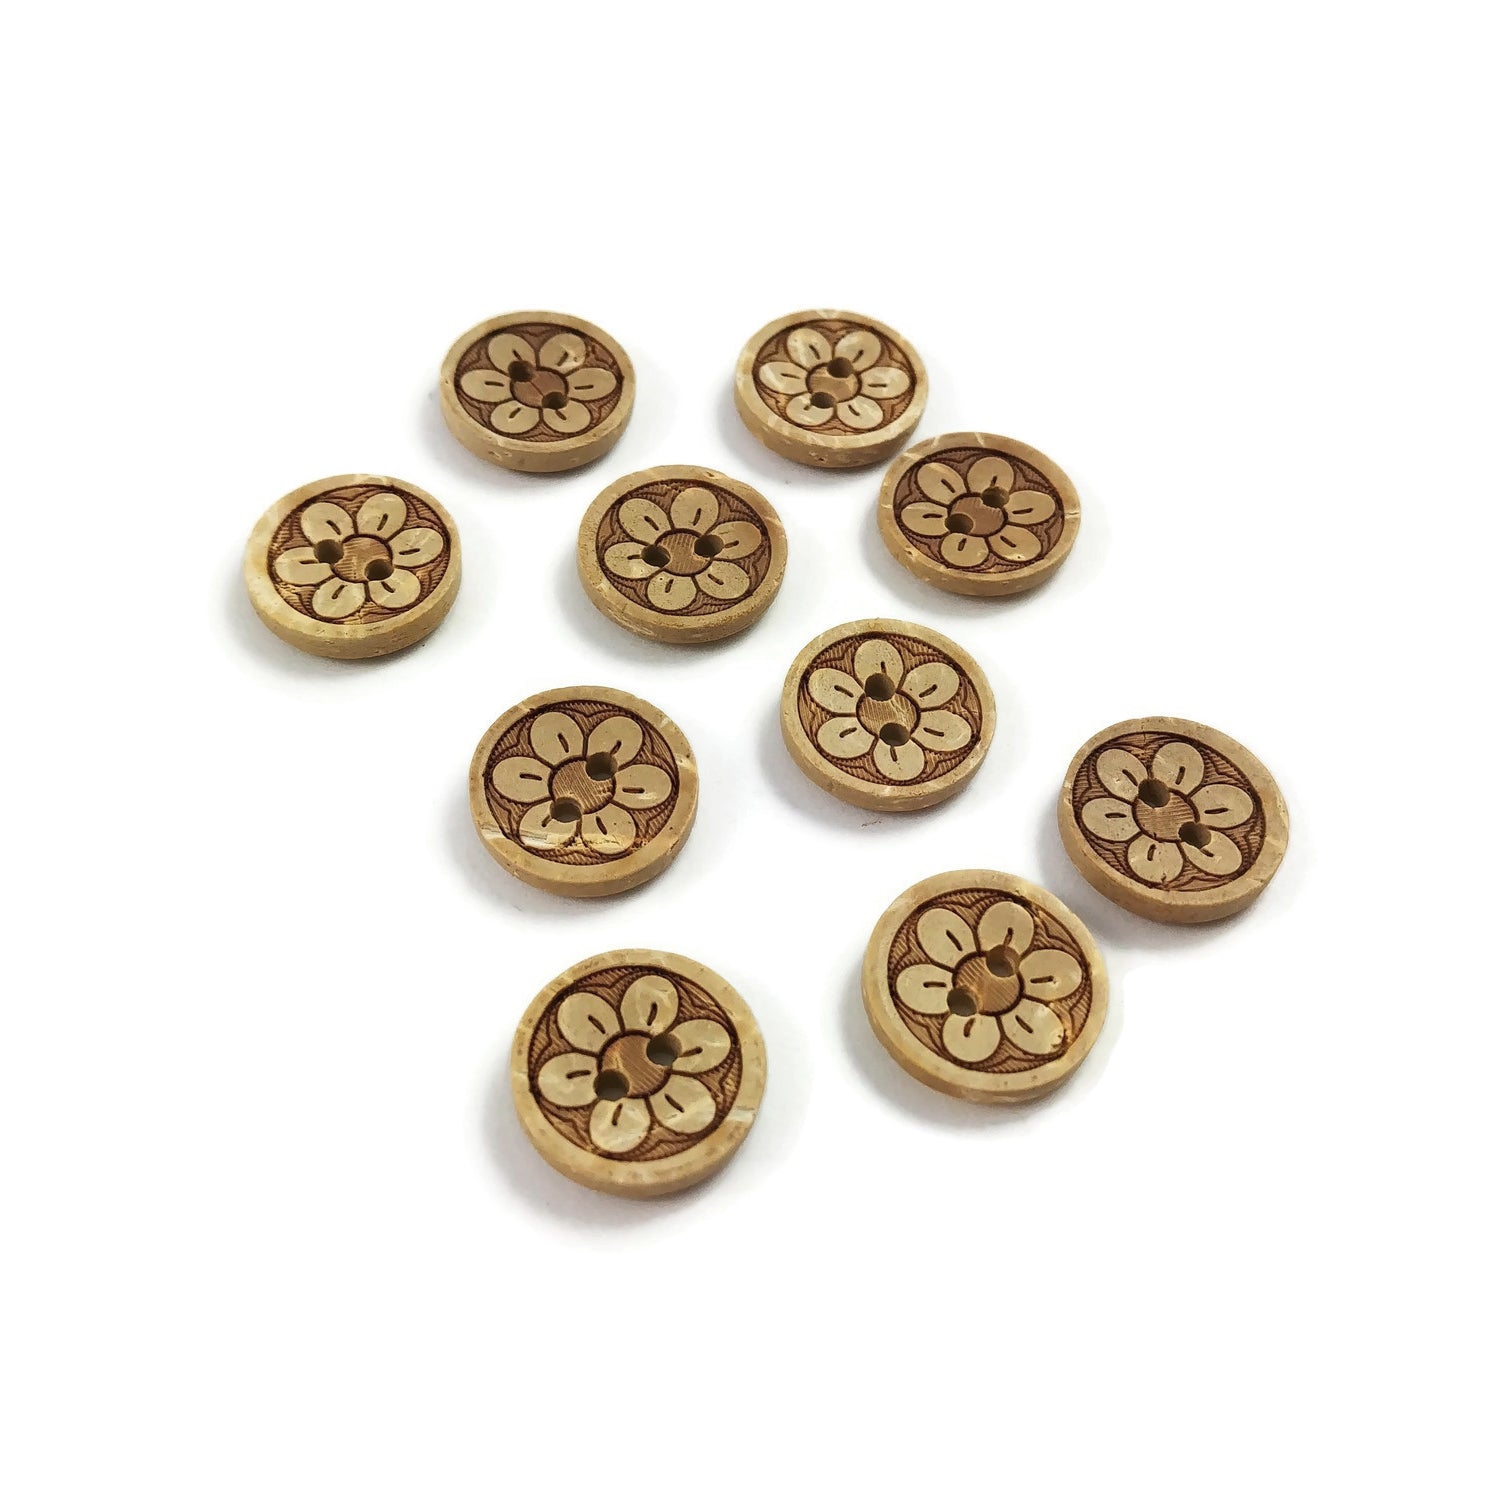 10 Coconut Shell Buttons 13 or 15mm - Daisy Flower